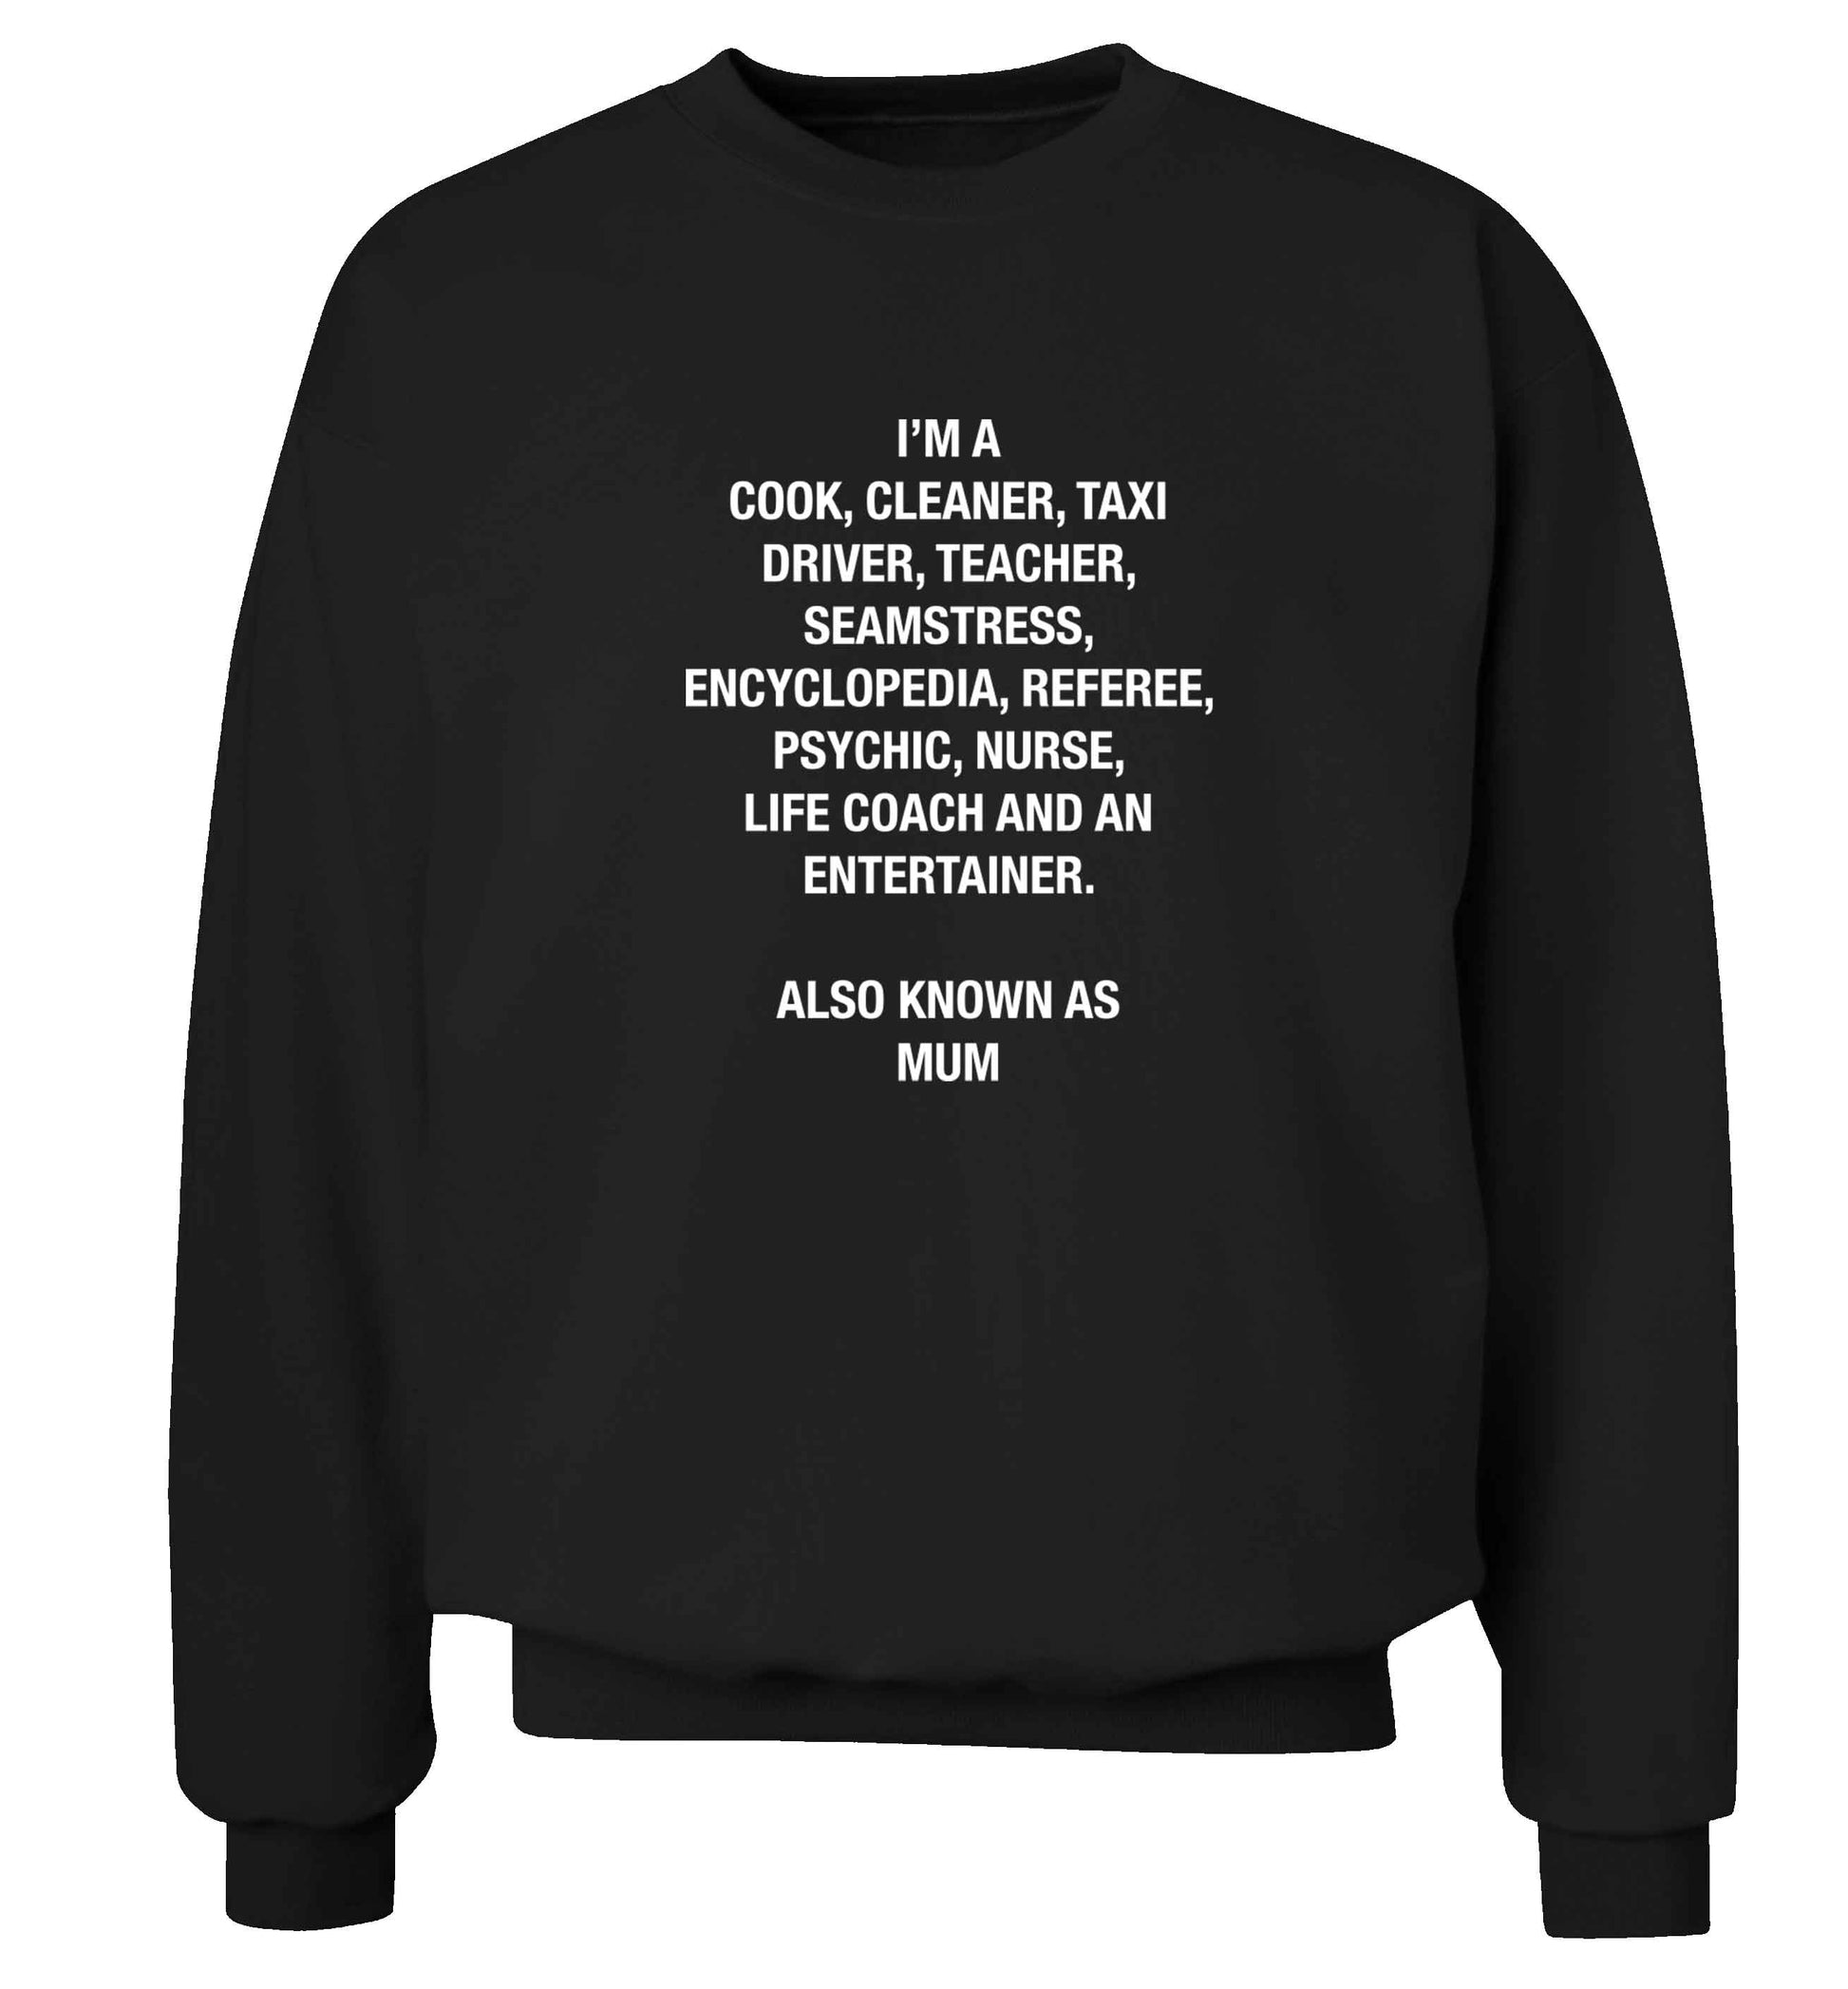 Funny gifts for your mum on mother's dayor her birthday! Mum, cook, cleaner, taxi driver, teacher, seamstress, encyclopedia, referee, psychic, nurse, life coach and entertainer adult's unisex black sweater 2XL